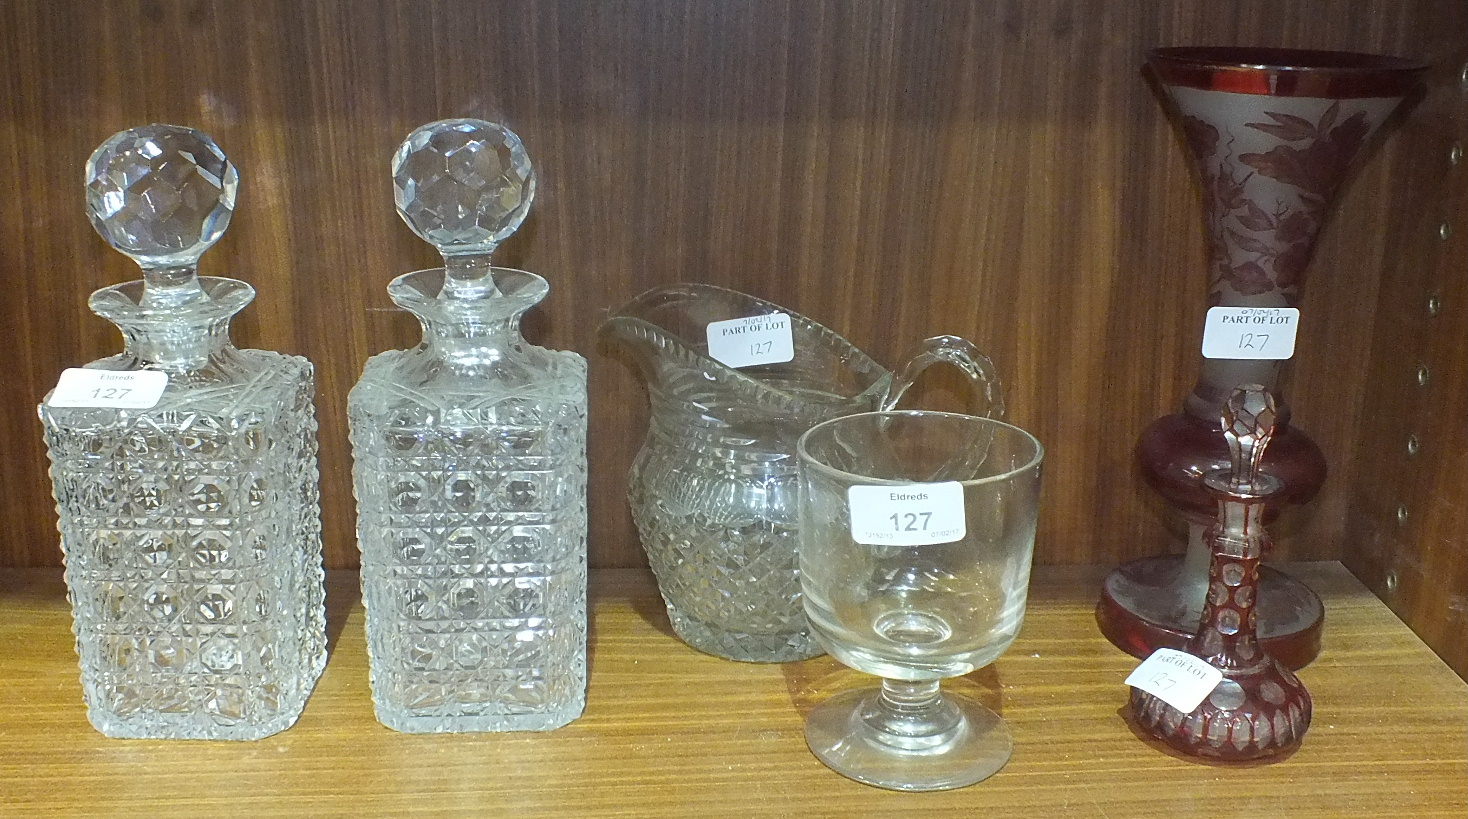 A pair of cut-glass decanters and stoppers, 23cm high, a glass rummer, a cut-glass jug, a ruby and